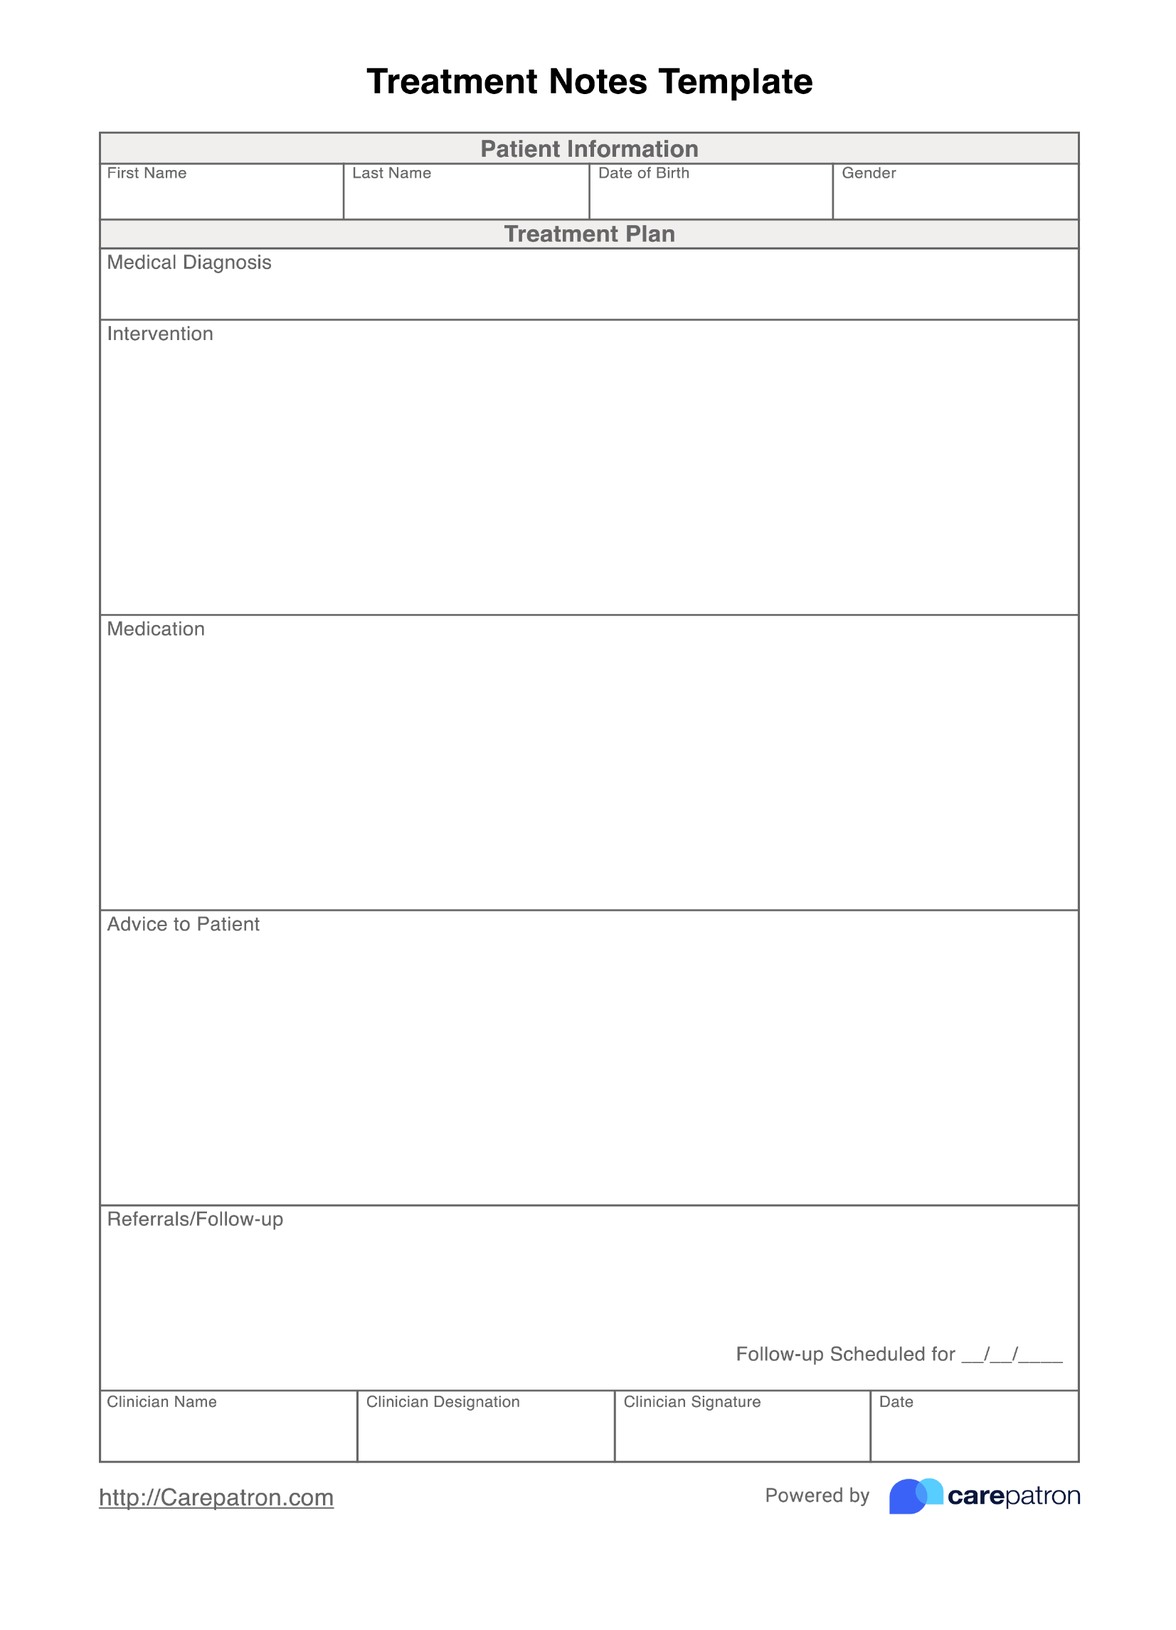 Treatment Note Template PDF Example